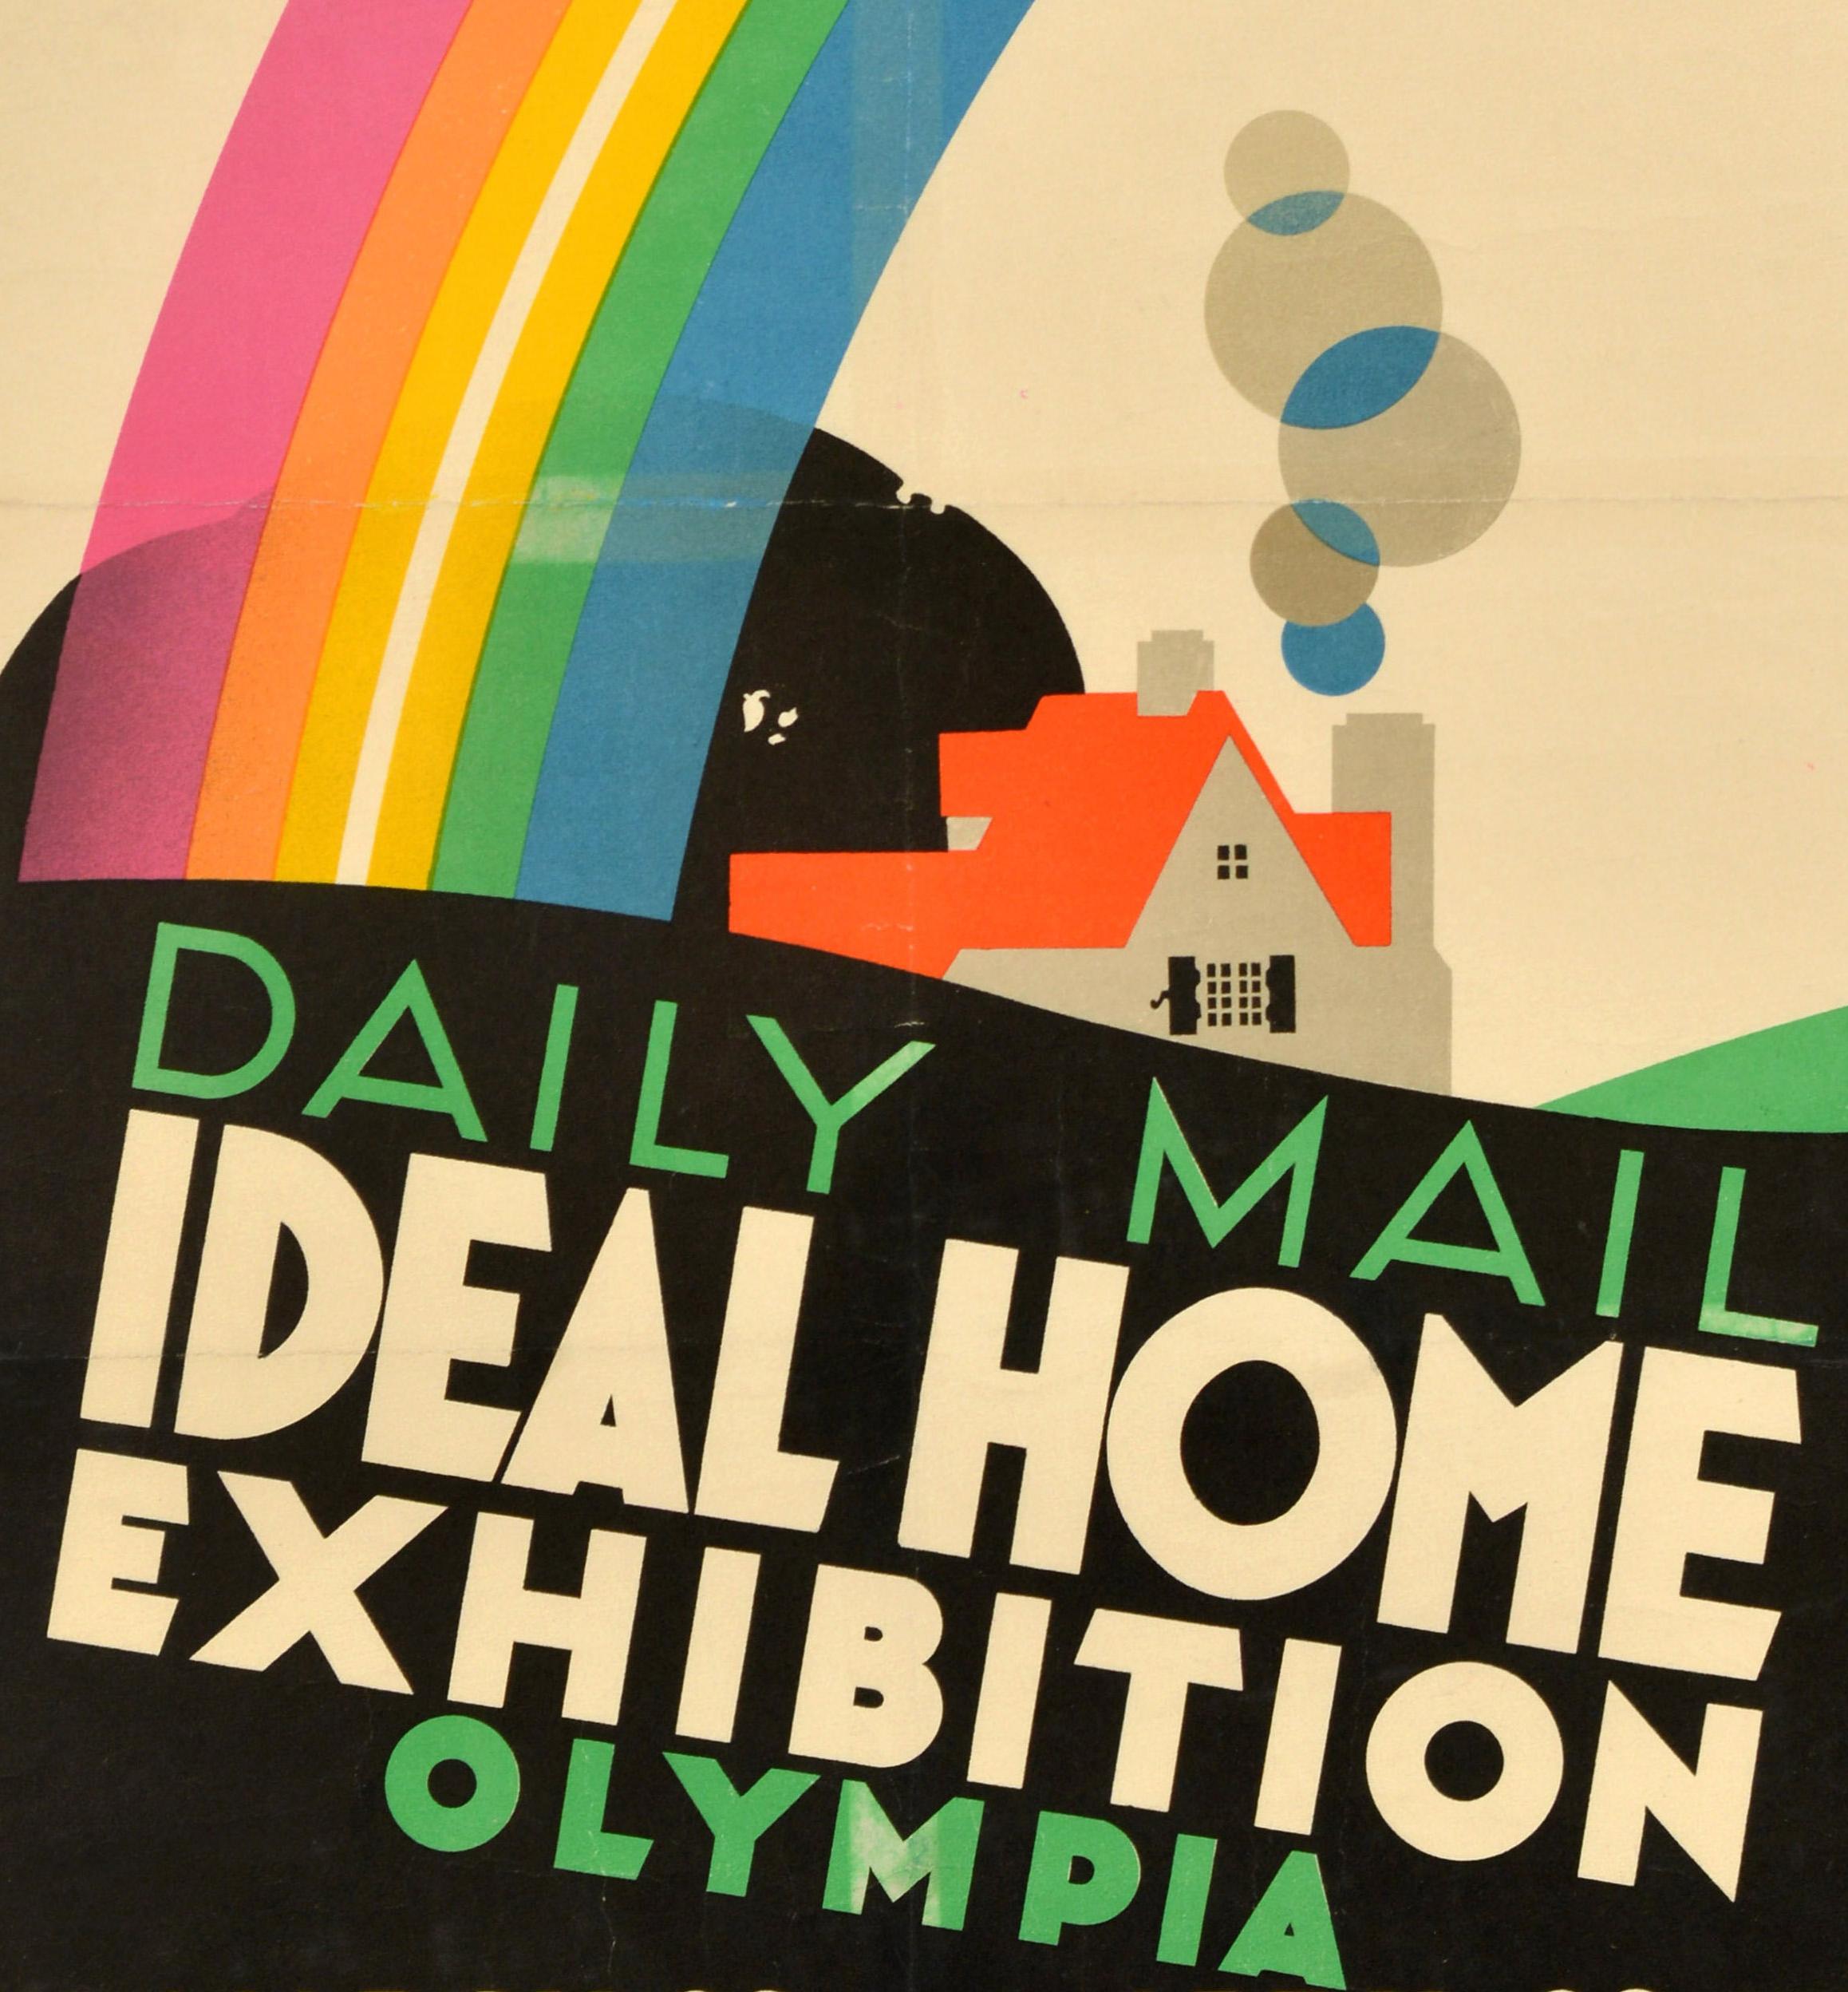 Original vintage advertising poster for the Daily Mail Ideal Home Exhibition Olympia held from 19 March to 29 April - We Are Exhibiting - featuring a colourful illustration by the notable British poster artist Frank Newbould (1887-1951) depicting a